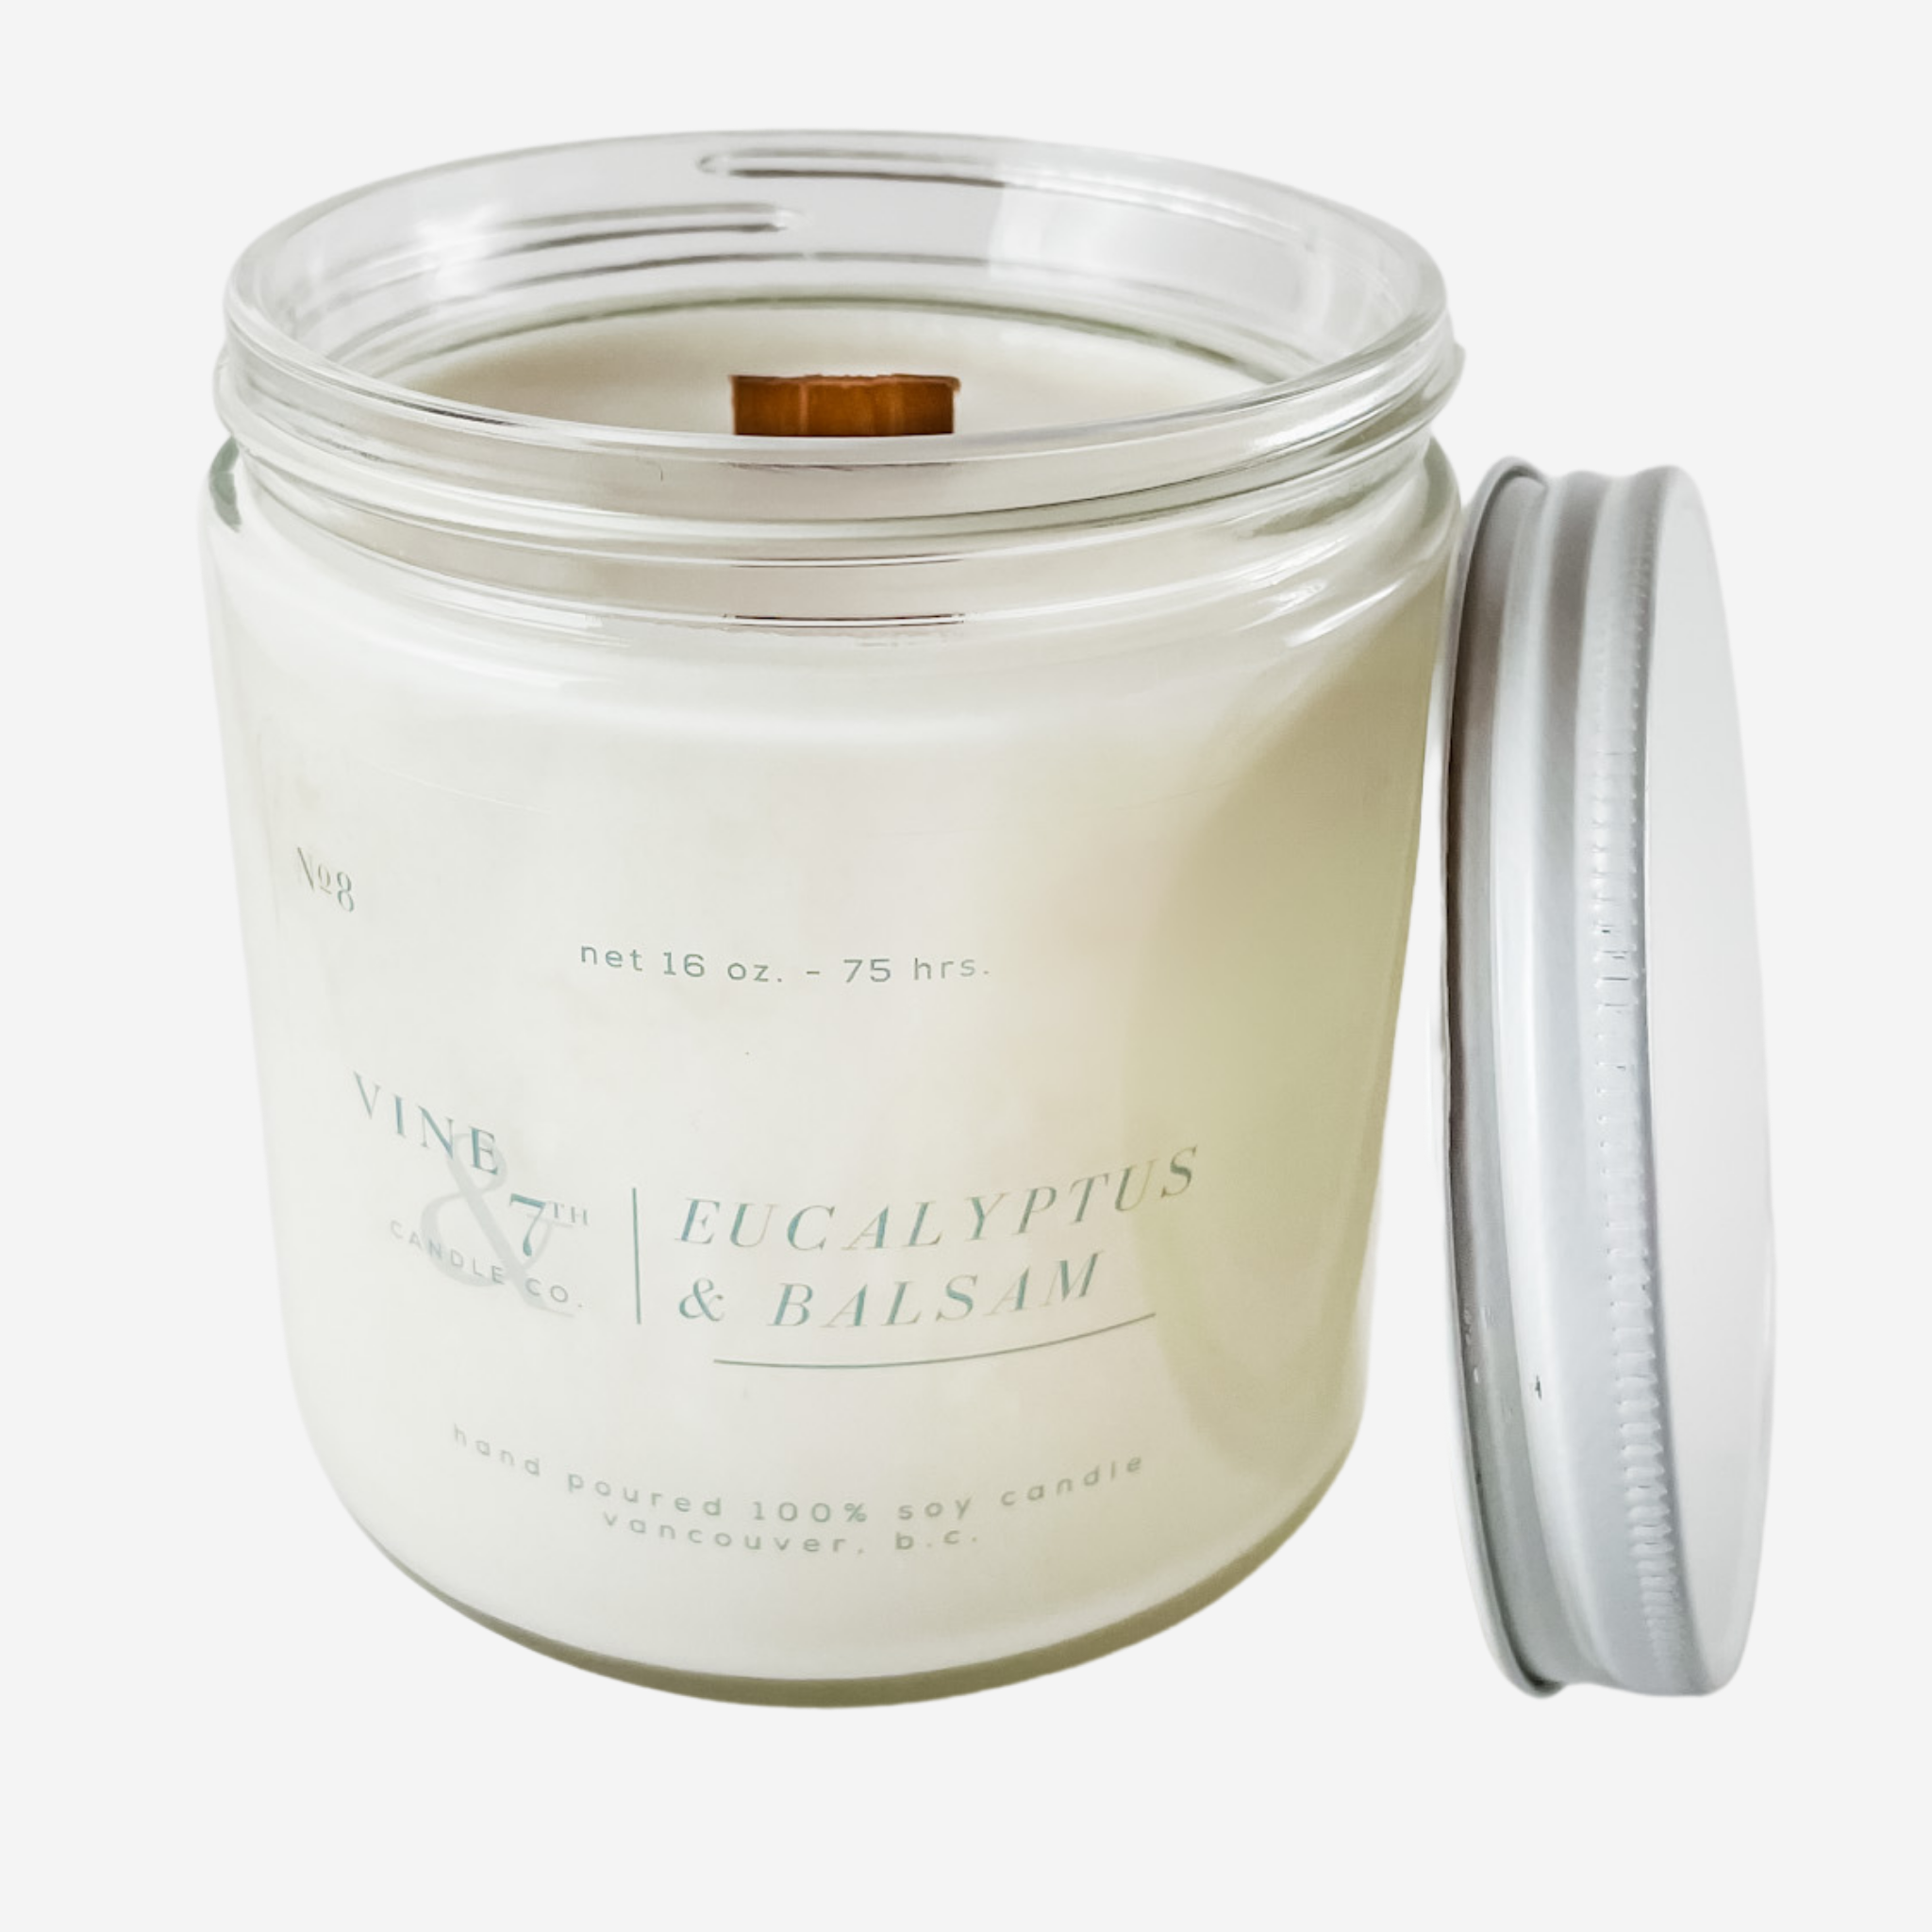 wood wick eucalyptus and balsam scented soy candle in a glass jar with lid